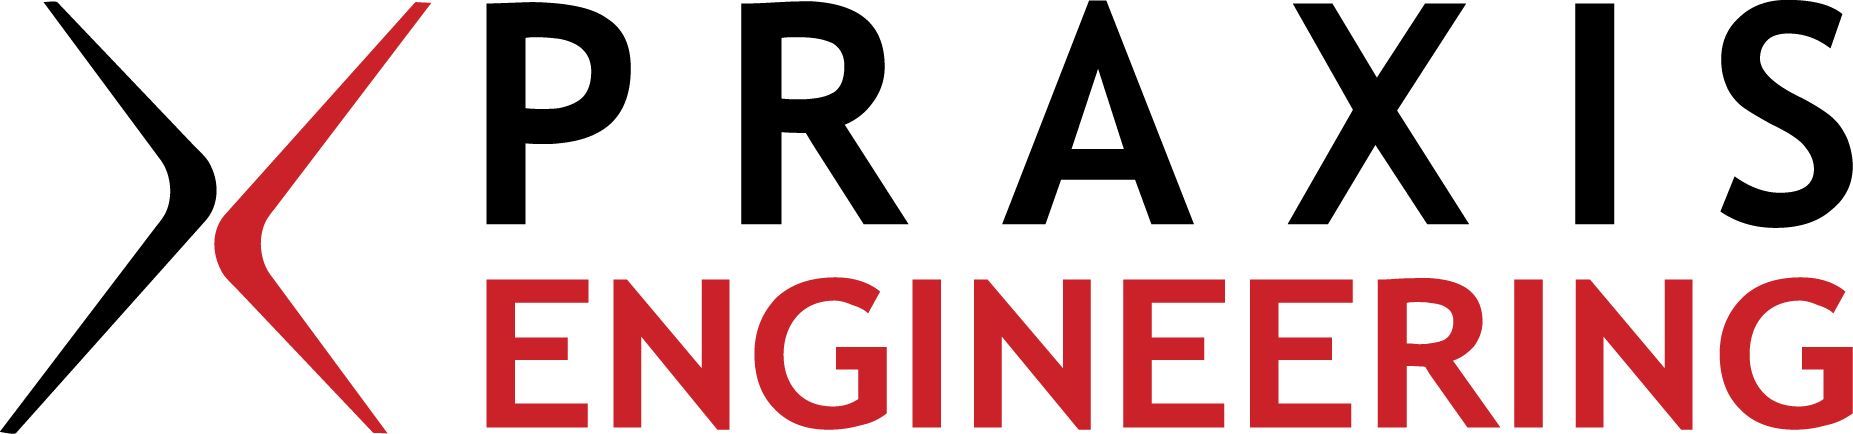 Praxis Engineering, a GDIT company logo